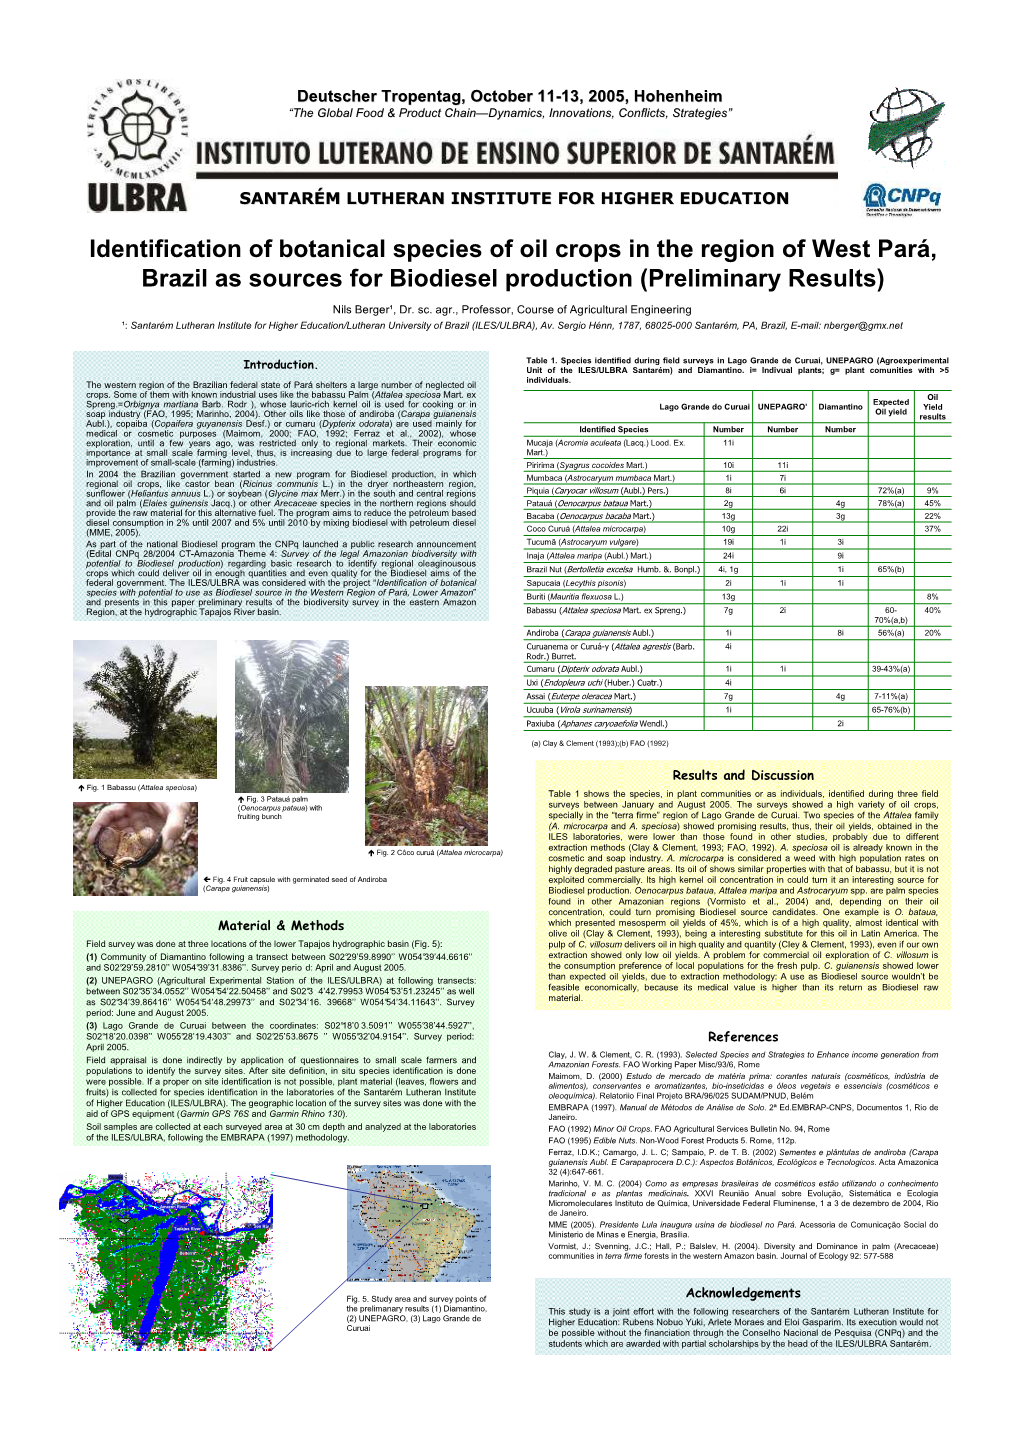 Identification of Botanical Species of Oil Crops in the Region of West Pará, Brazil As Sources for Biodiesel Production (Preliminary Results)